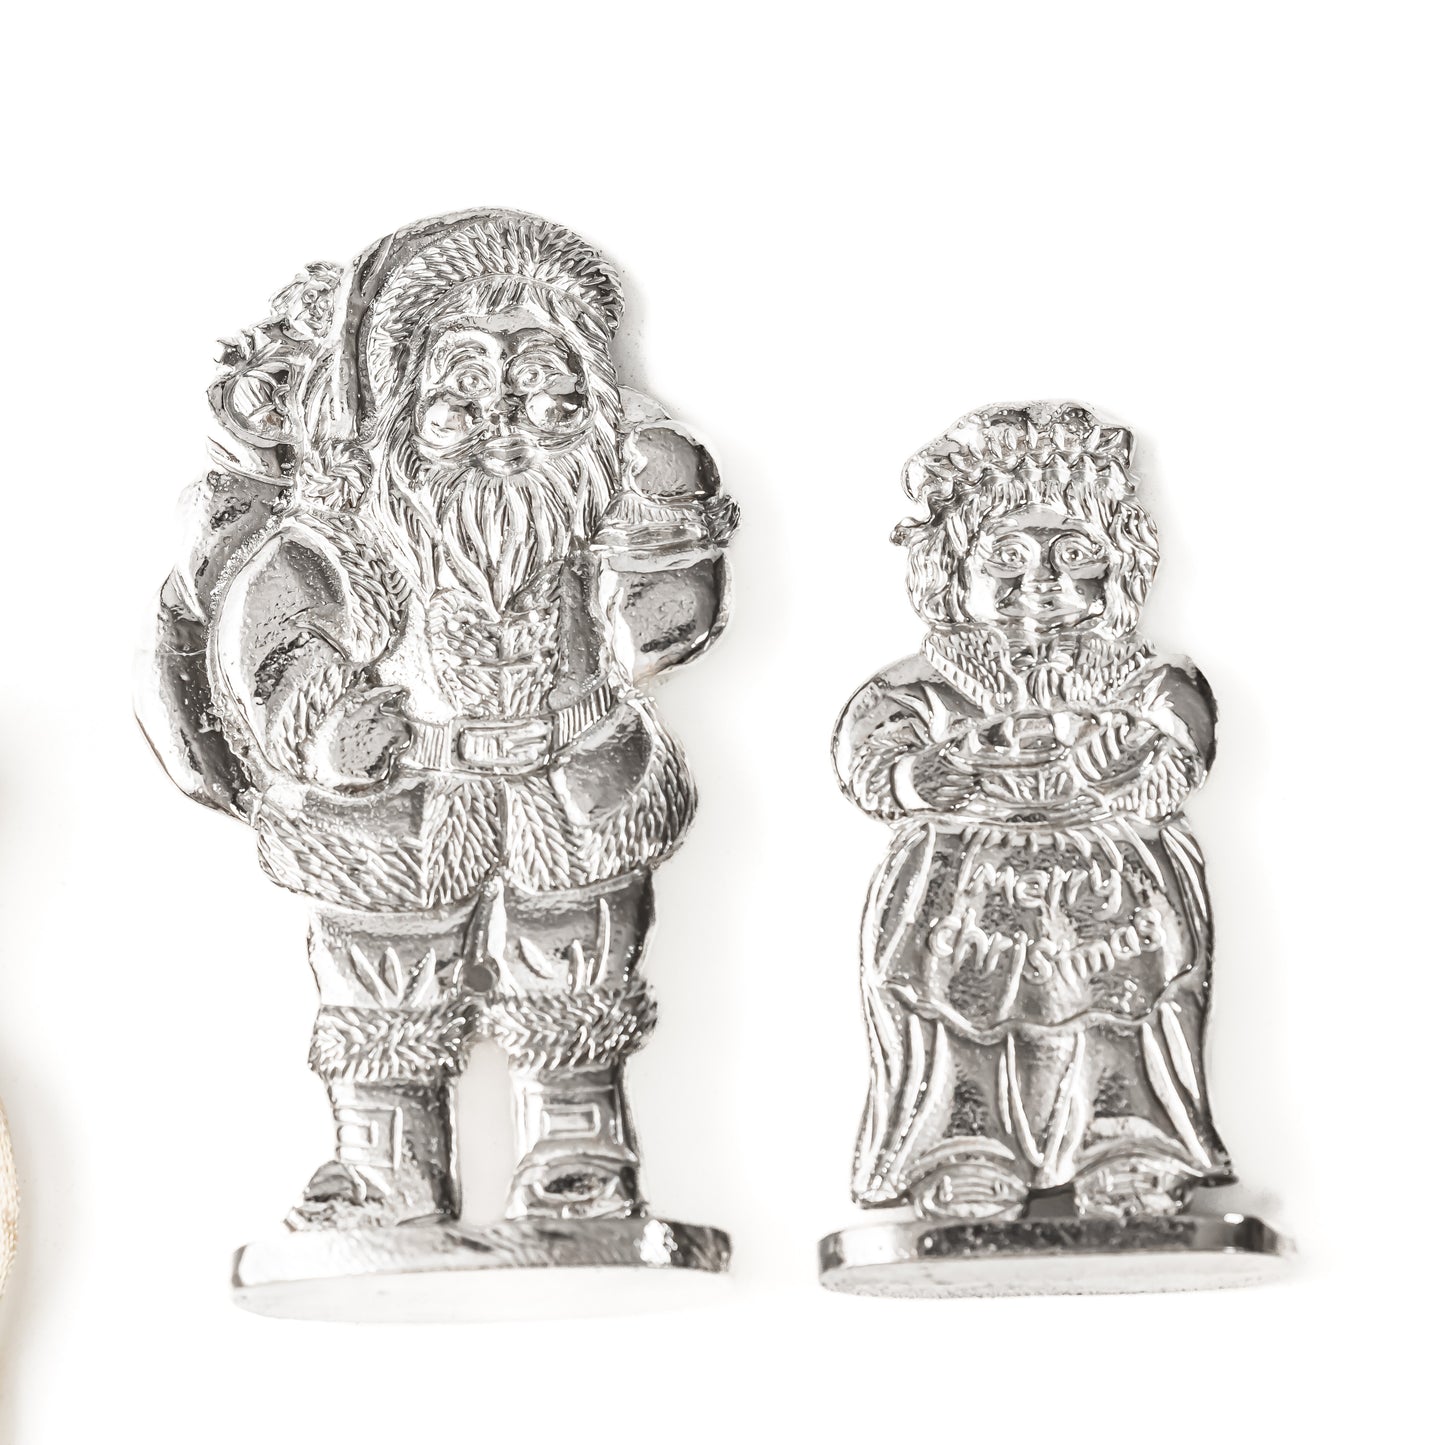 Santa and Mrs. Claus Figurines - Christmas Decorations for Mantle